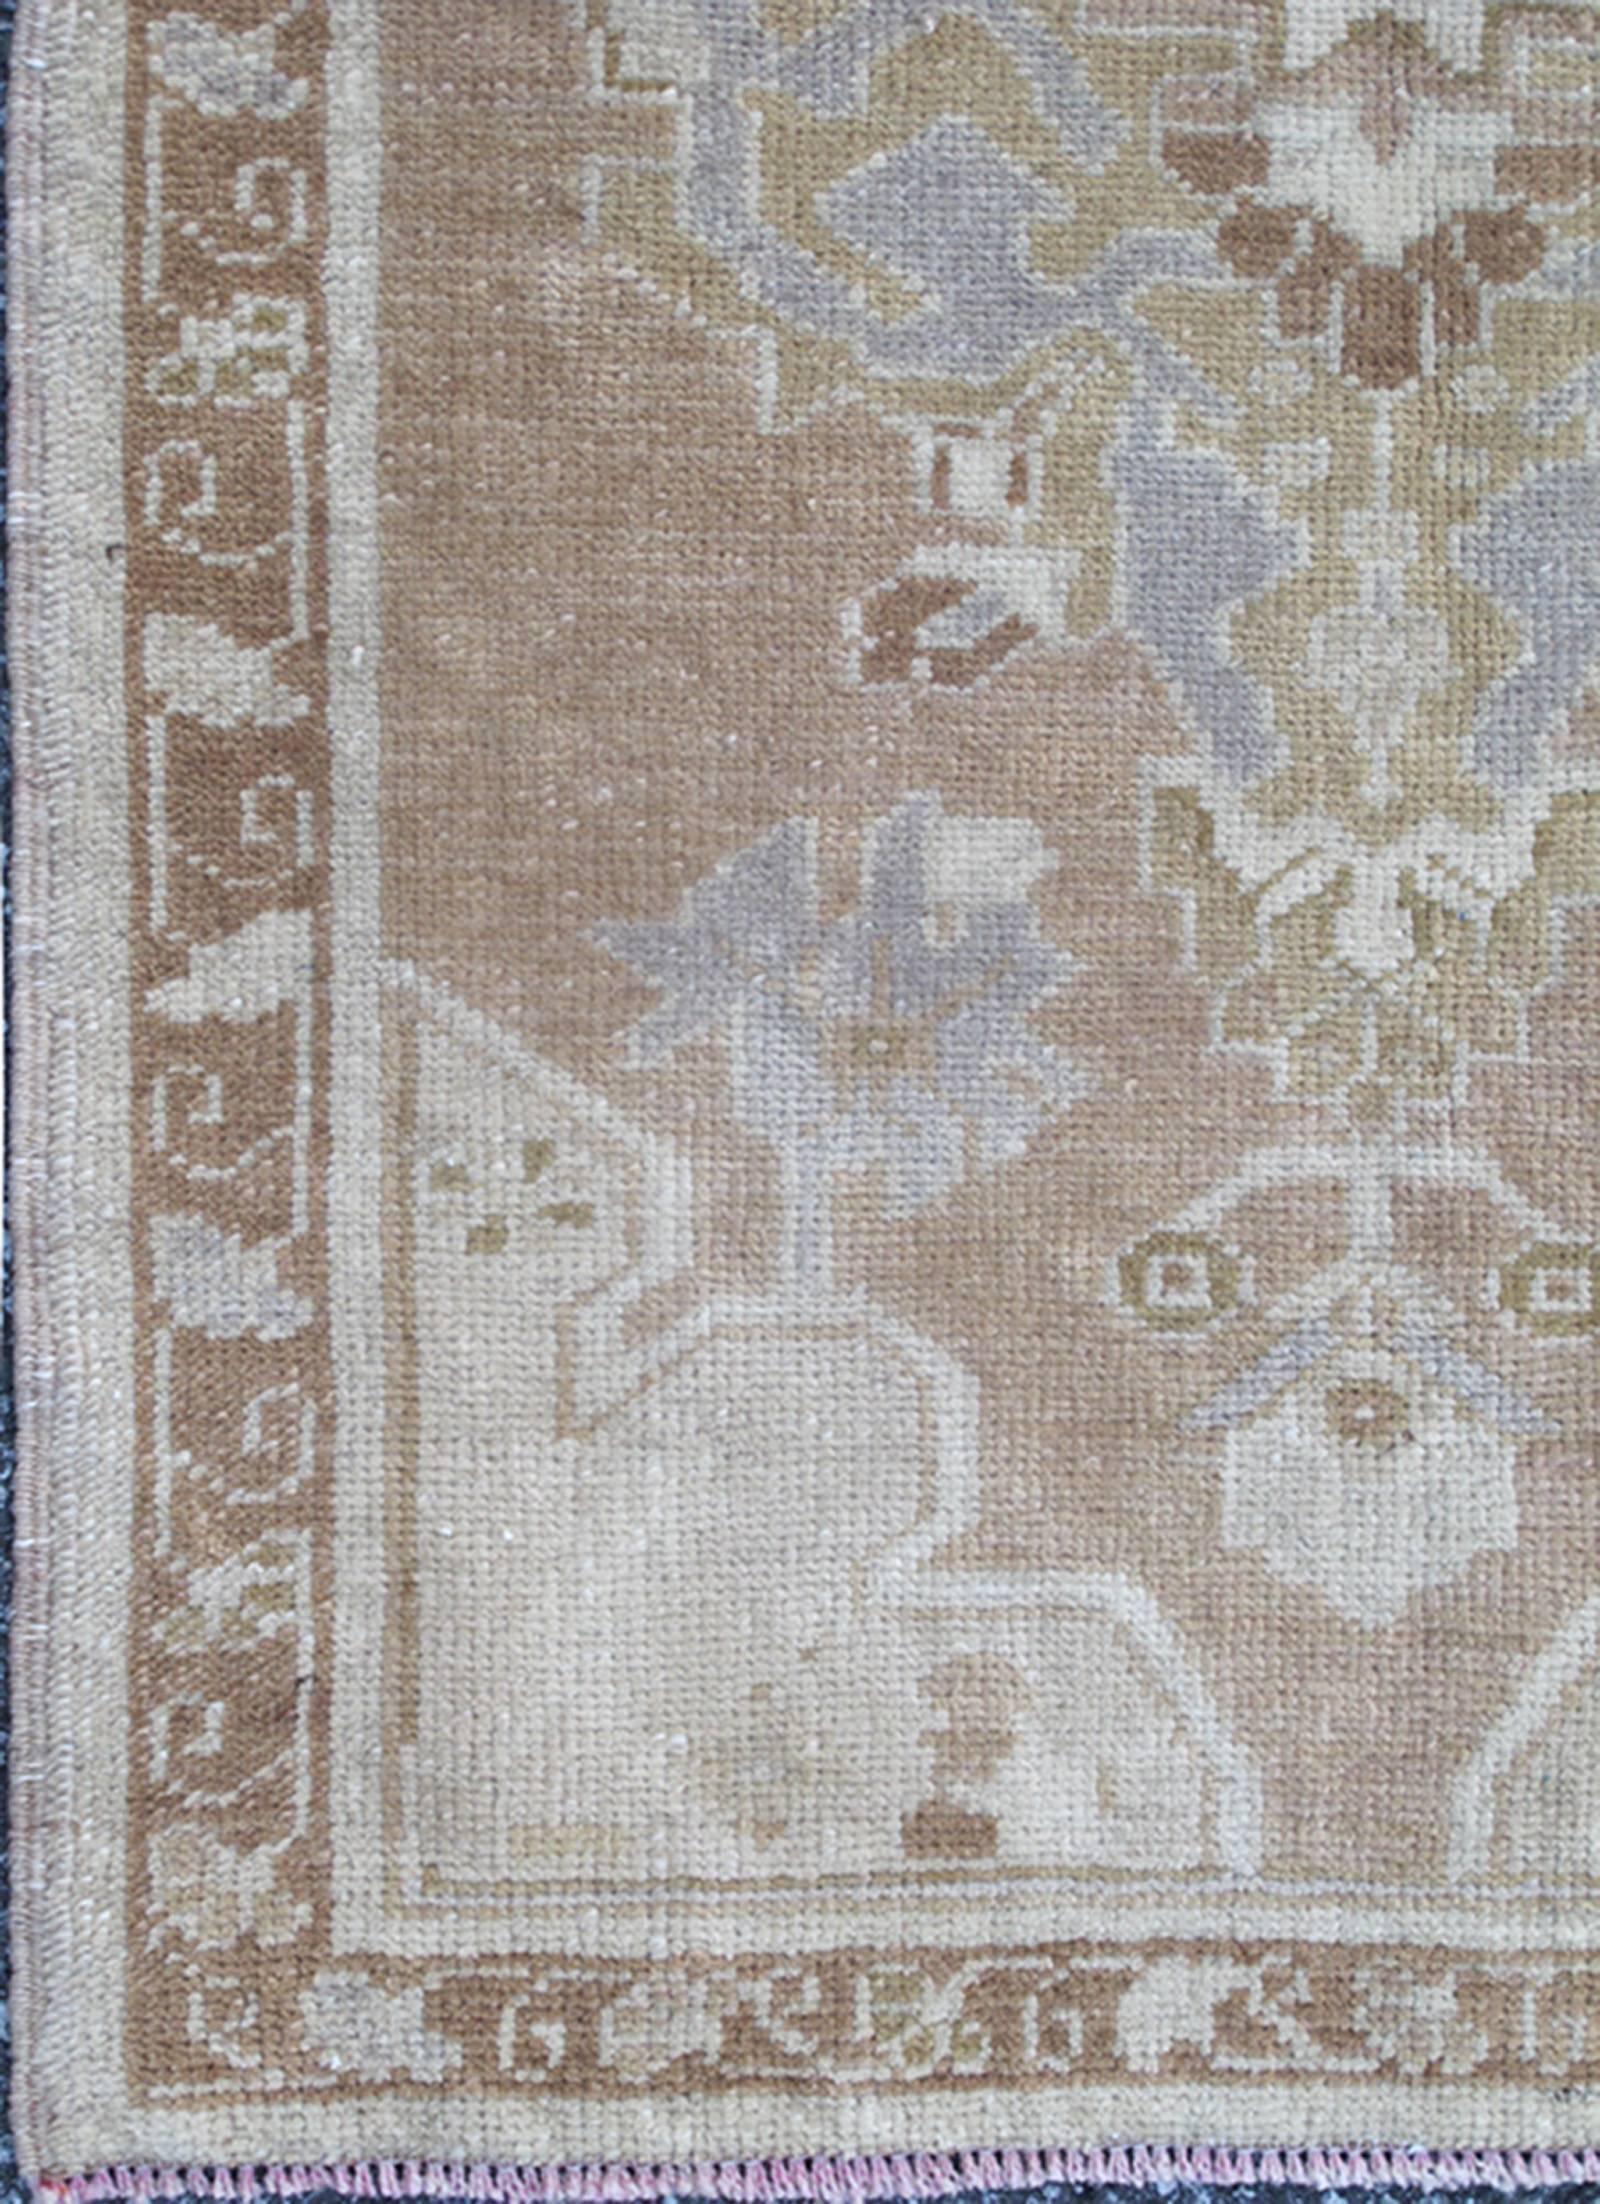 This Turkish Oushak carpet features a central medallion design, as well as patterns of smaller geometric shapes and botanical elements. The rug's qualities are enhanced by its particularly soft and lustrous wool. Colors include medium and light